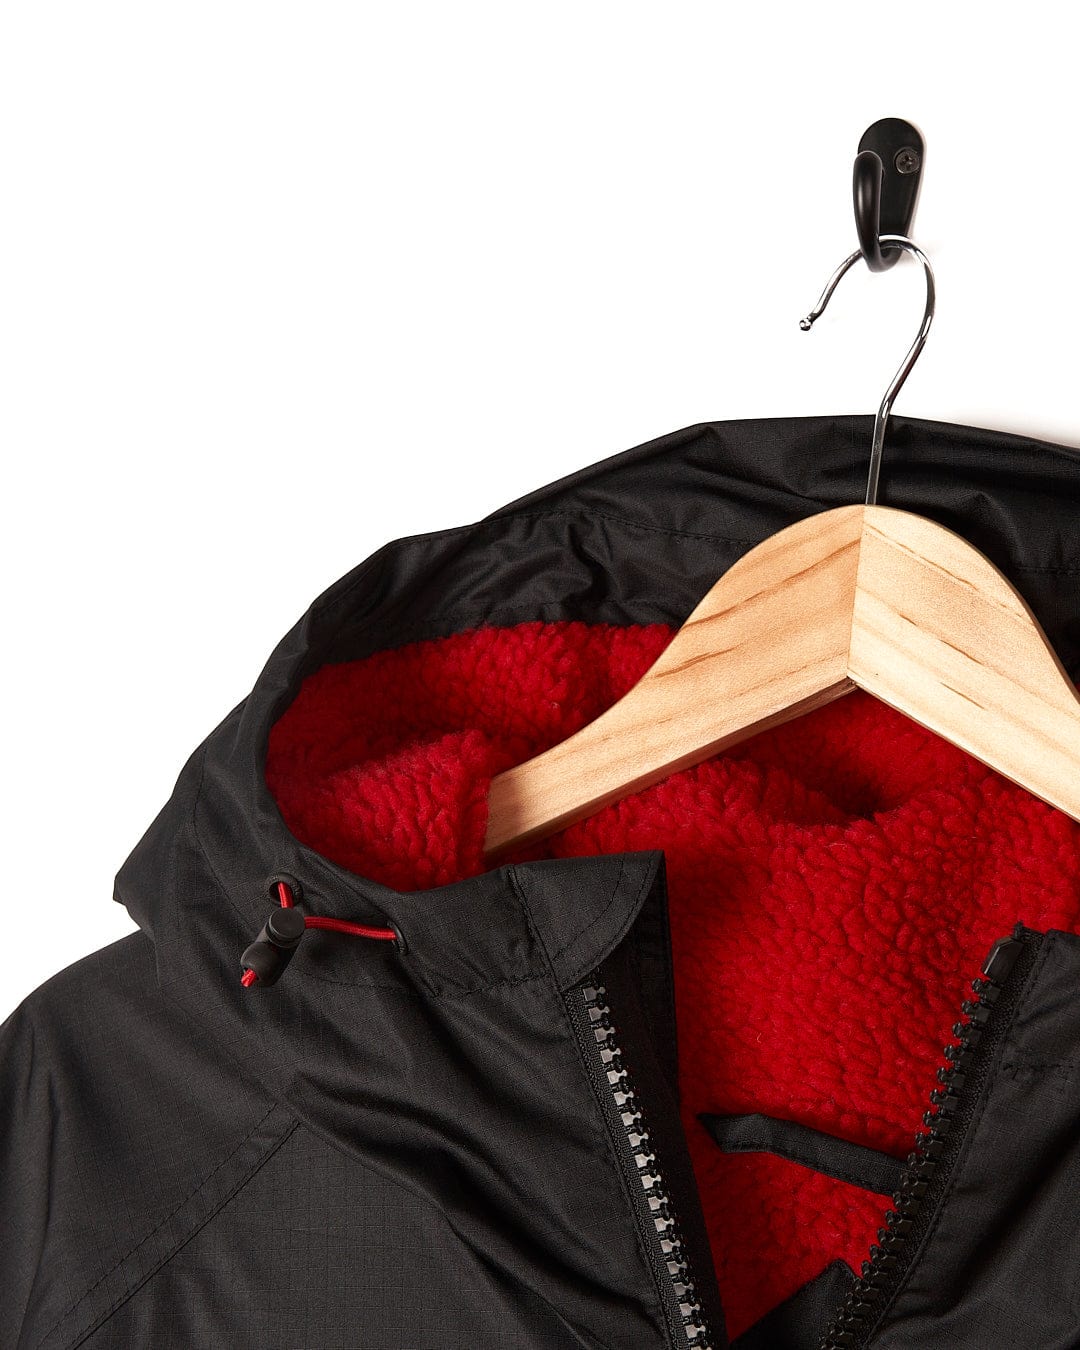 Black Recycled Four Seasons Changing Robe with a red microfibre fleece lining on a wooden hanger, isolated on a white background by Saltrock.